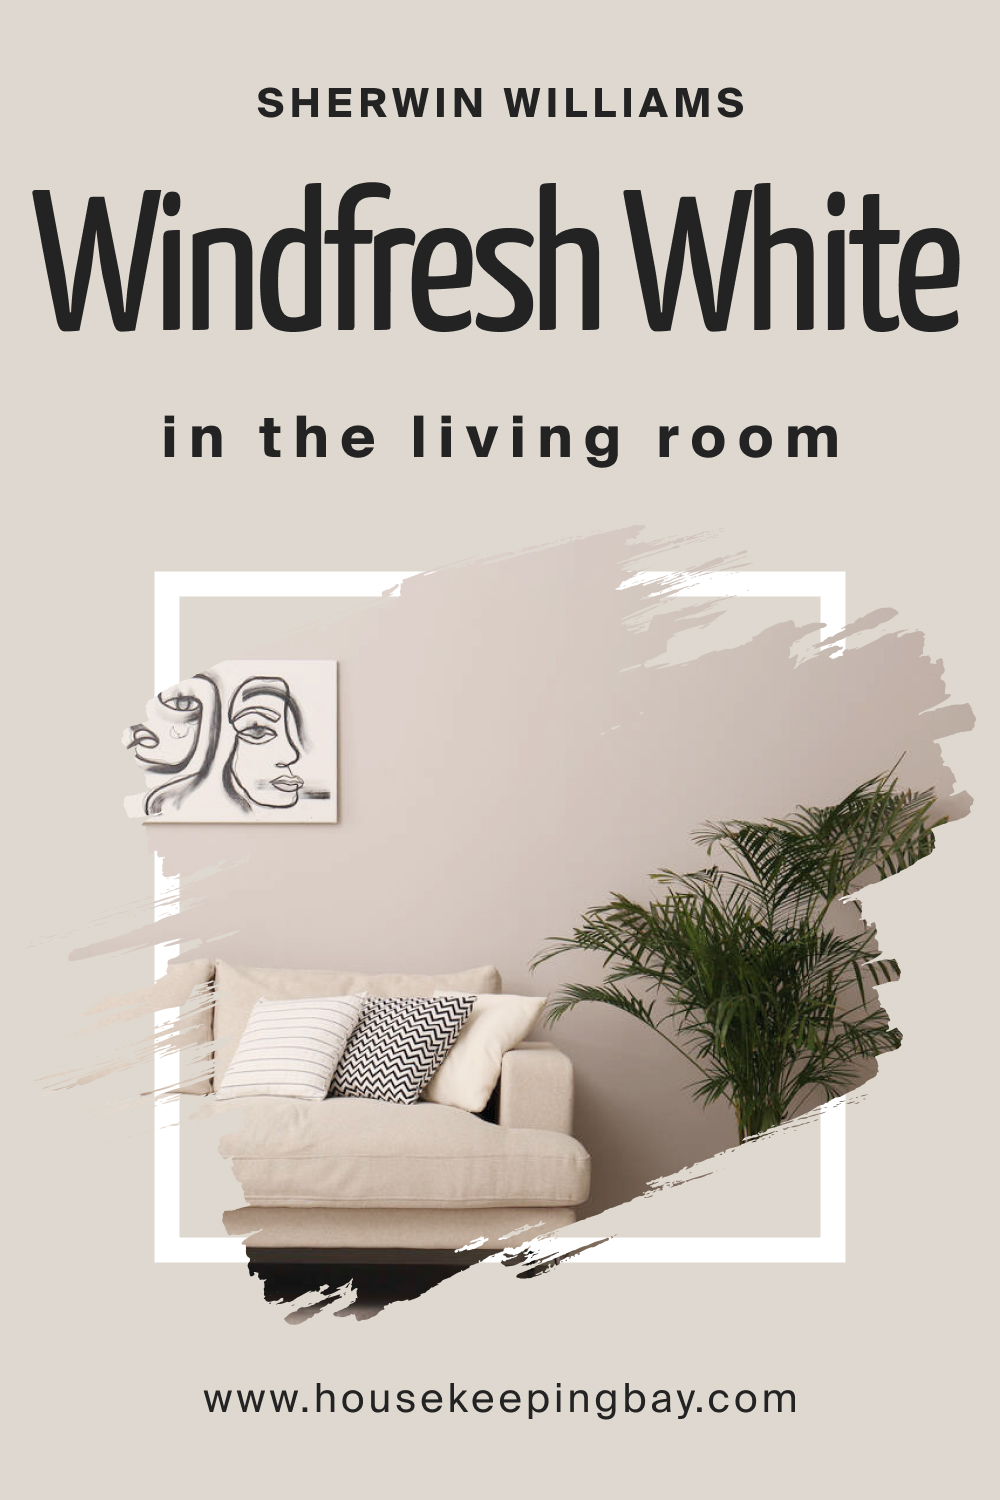 Sherwin Williams. SW Windfresh White In the Living Room